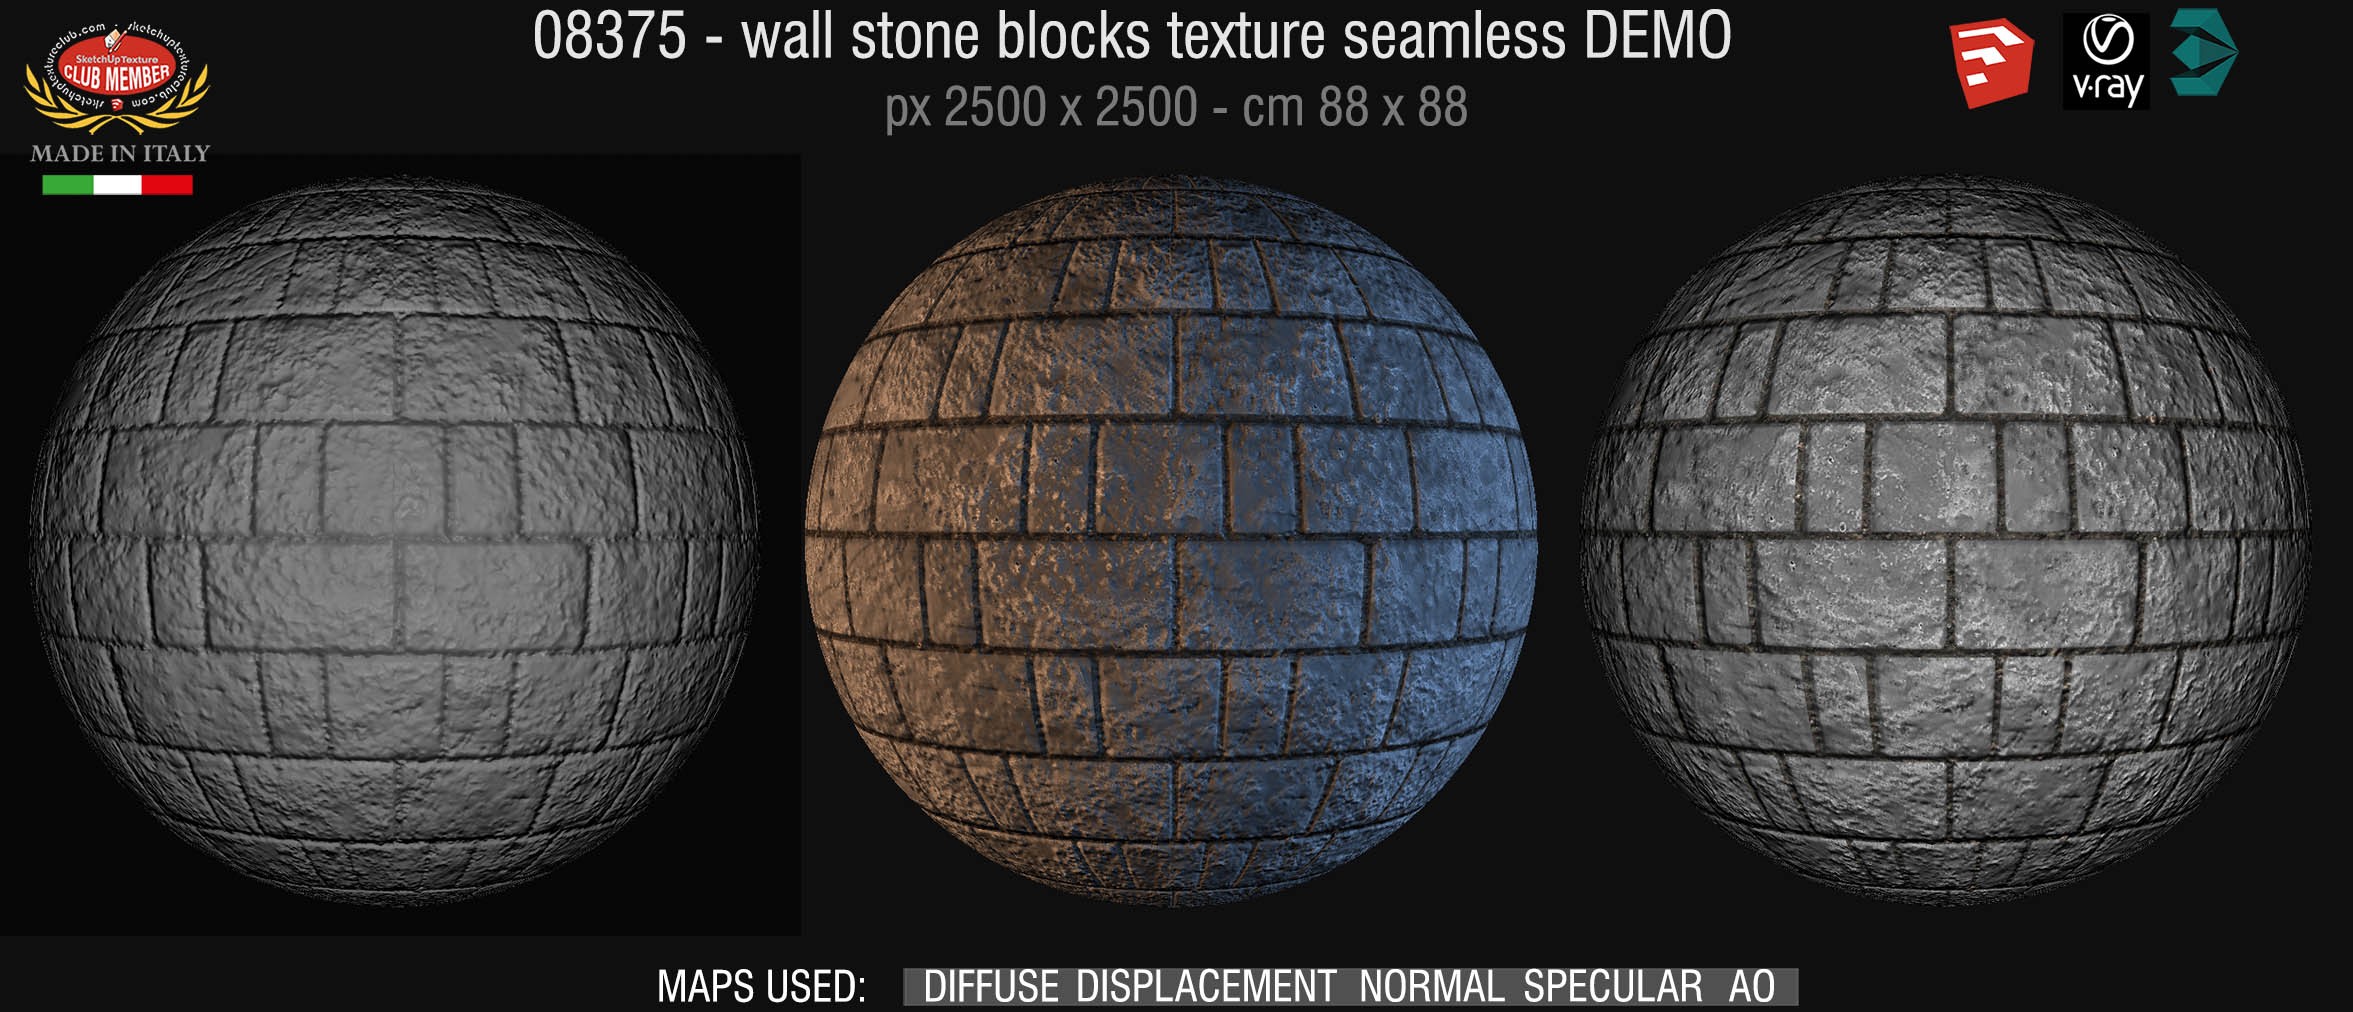 08375 HR Wall stone with regular blocks texture + maps DEMO